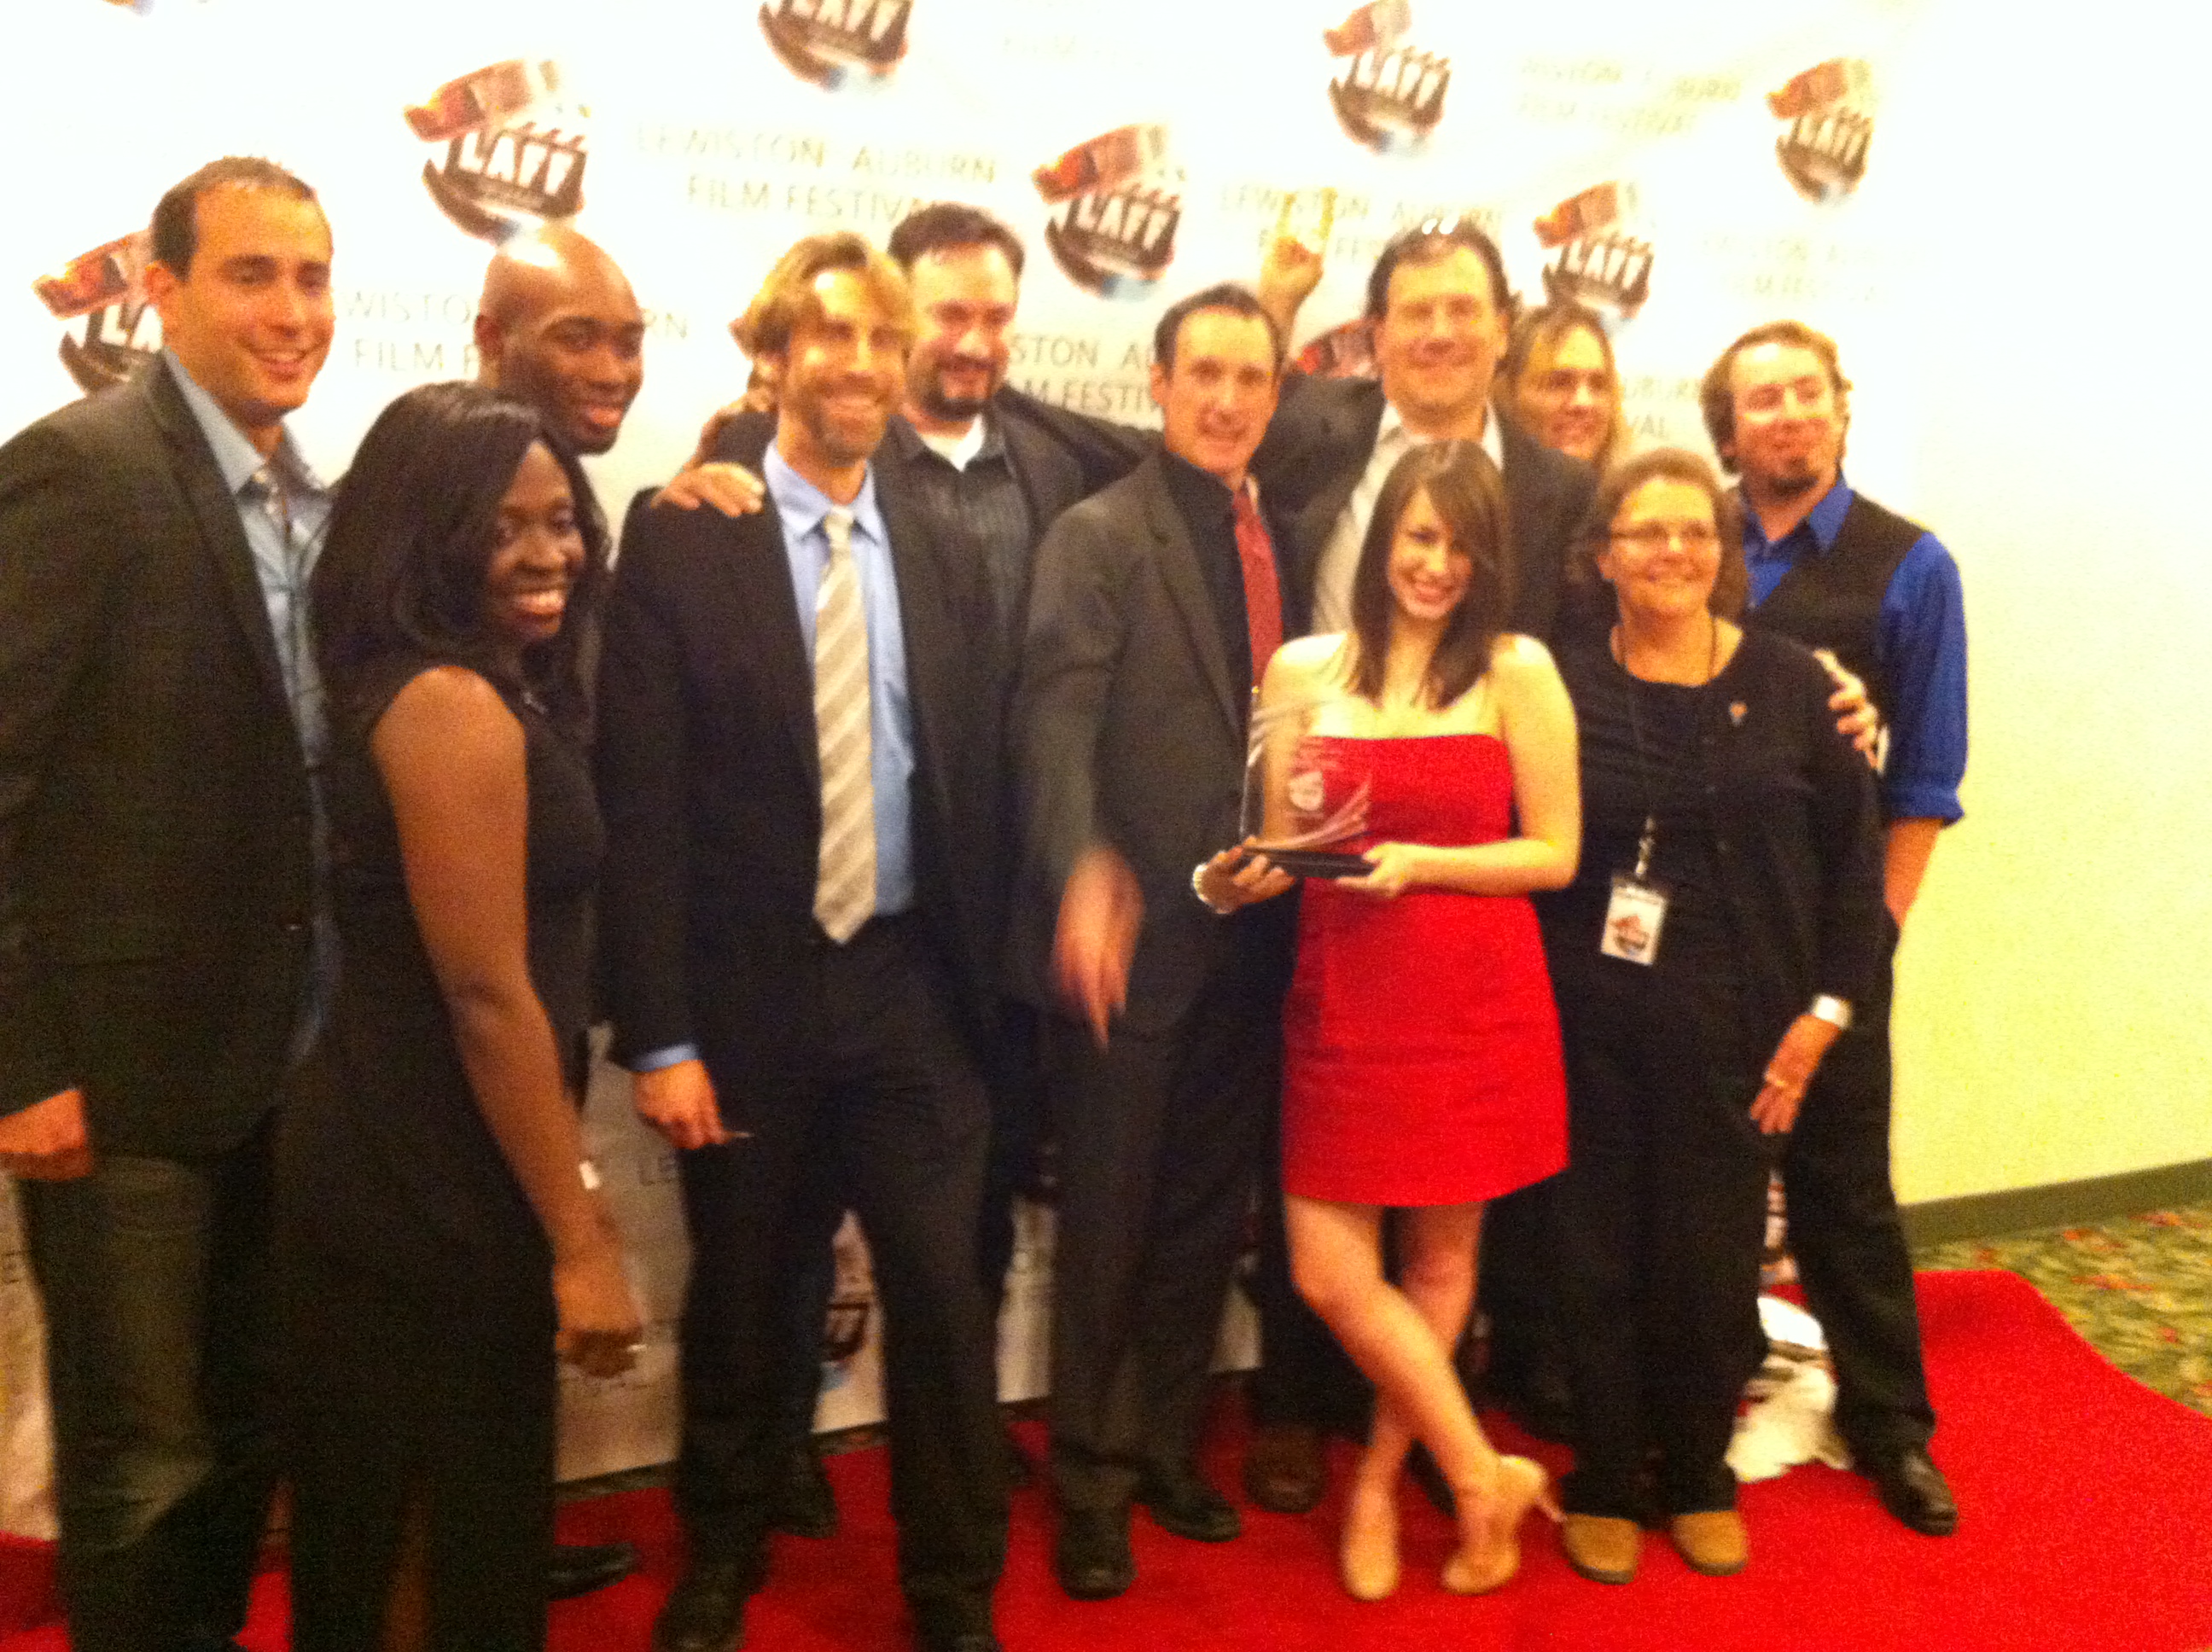 Cast and Crew of You Can't Kill Stephen King Premiere at LAFF. Winner of Audience Award for Feature Film 2012.